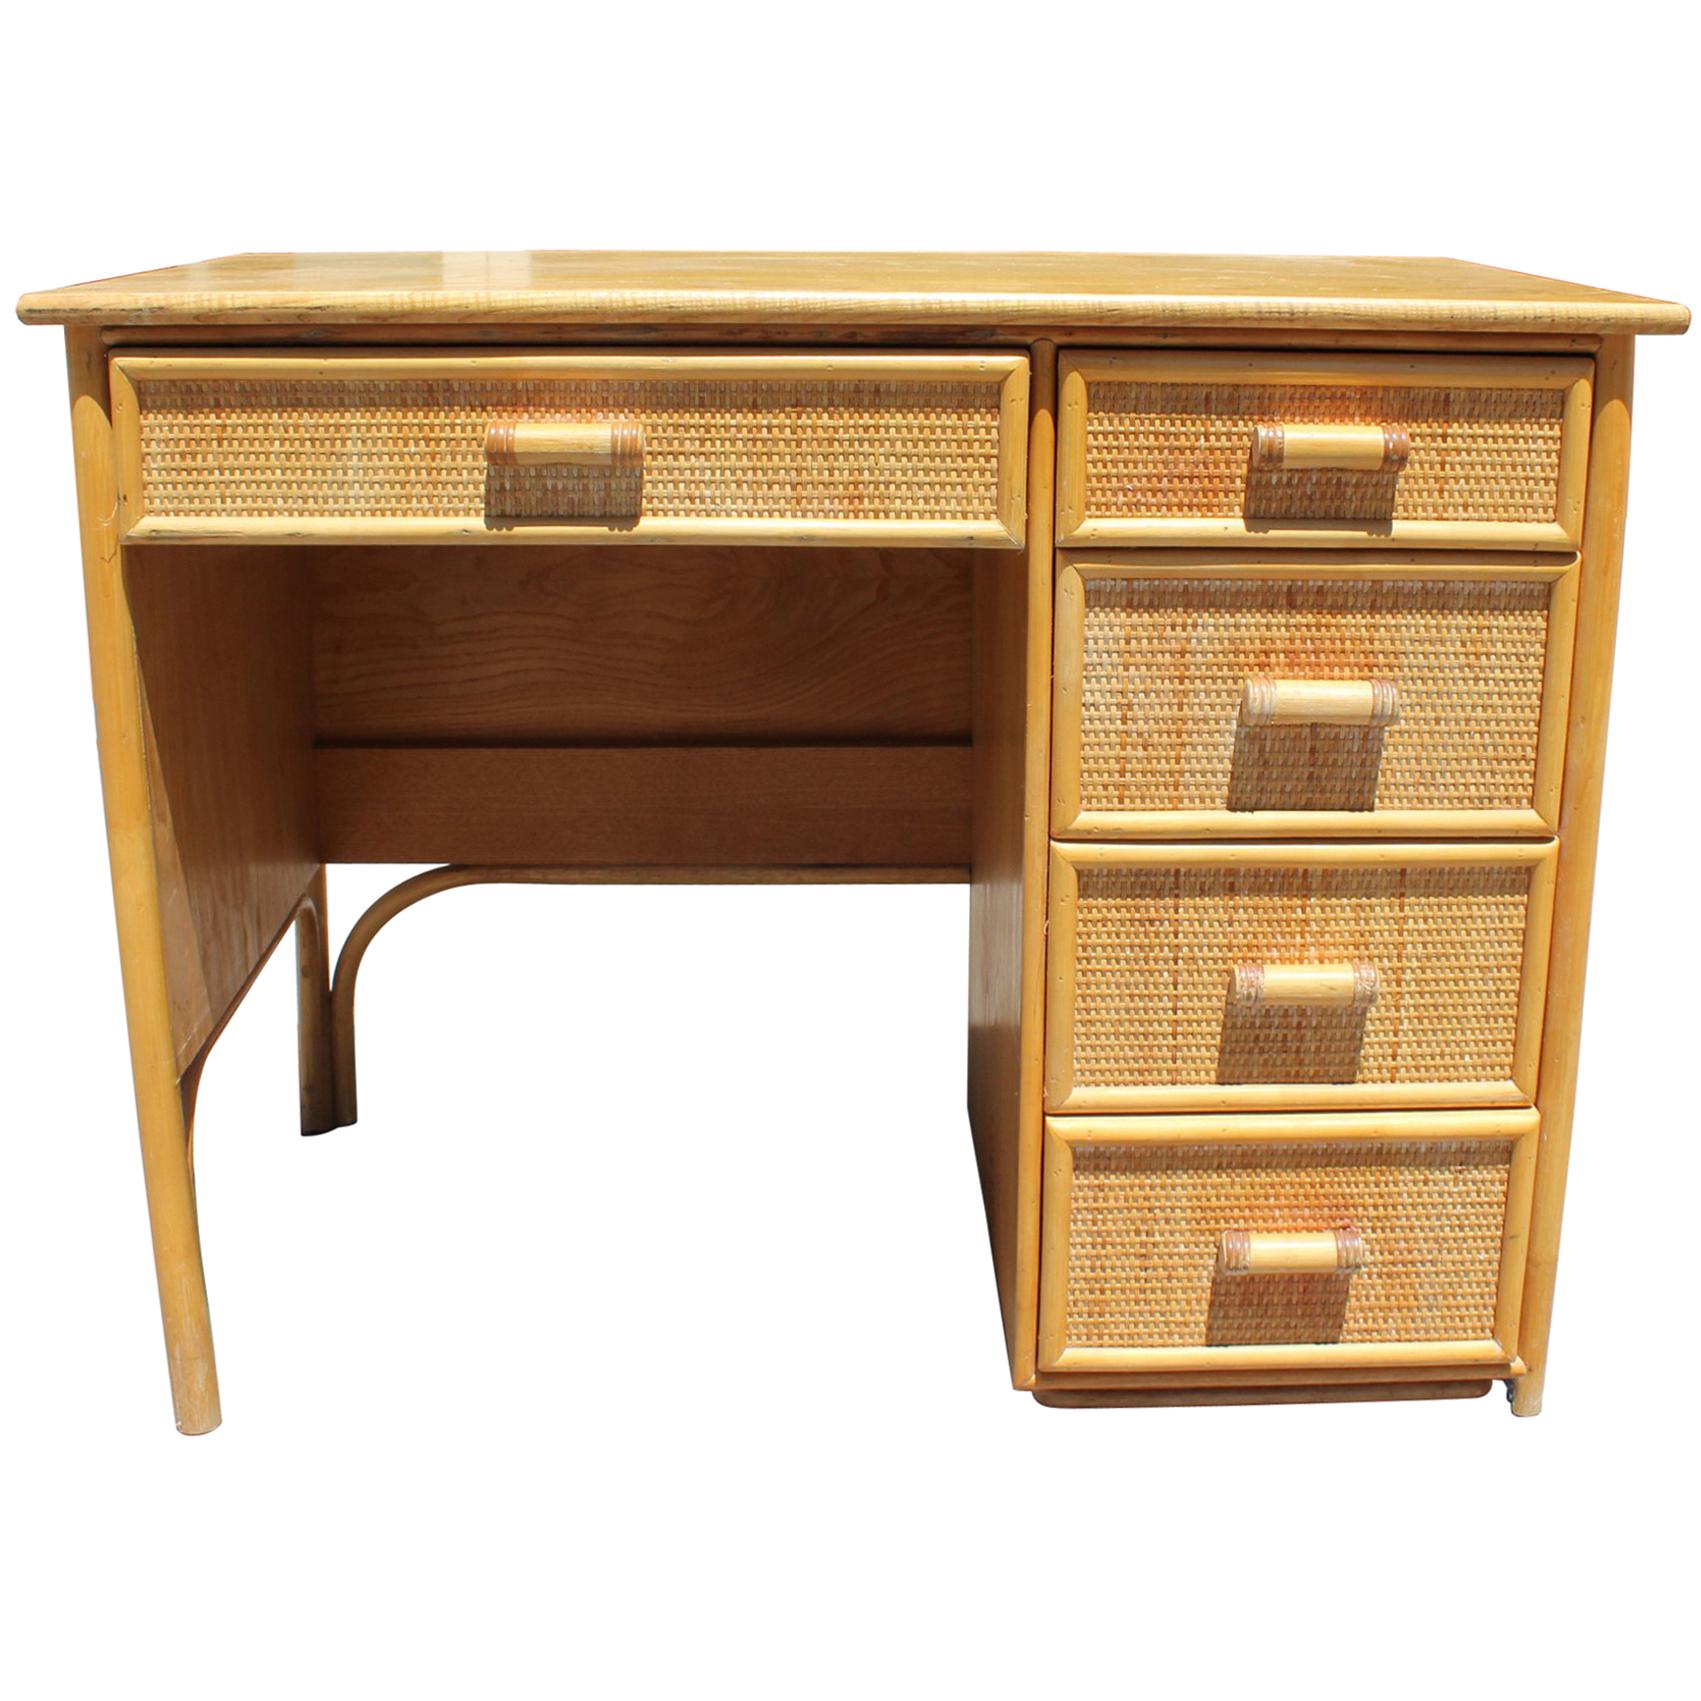 1980s Bamboo and Rattan Desk with Drawers For Sale